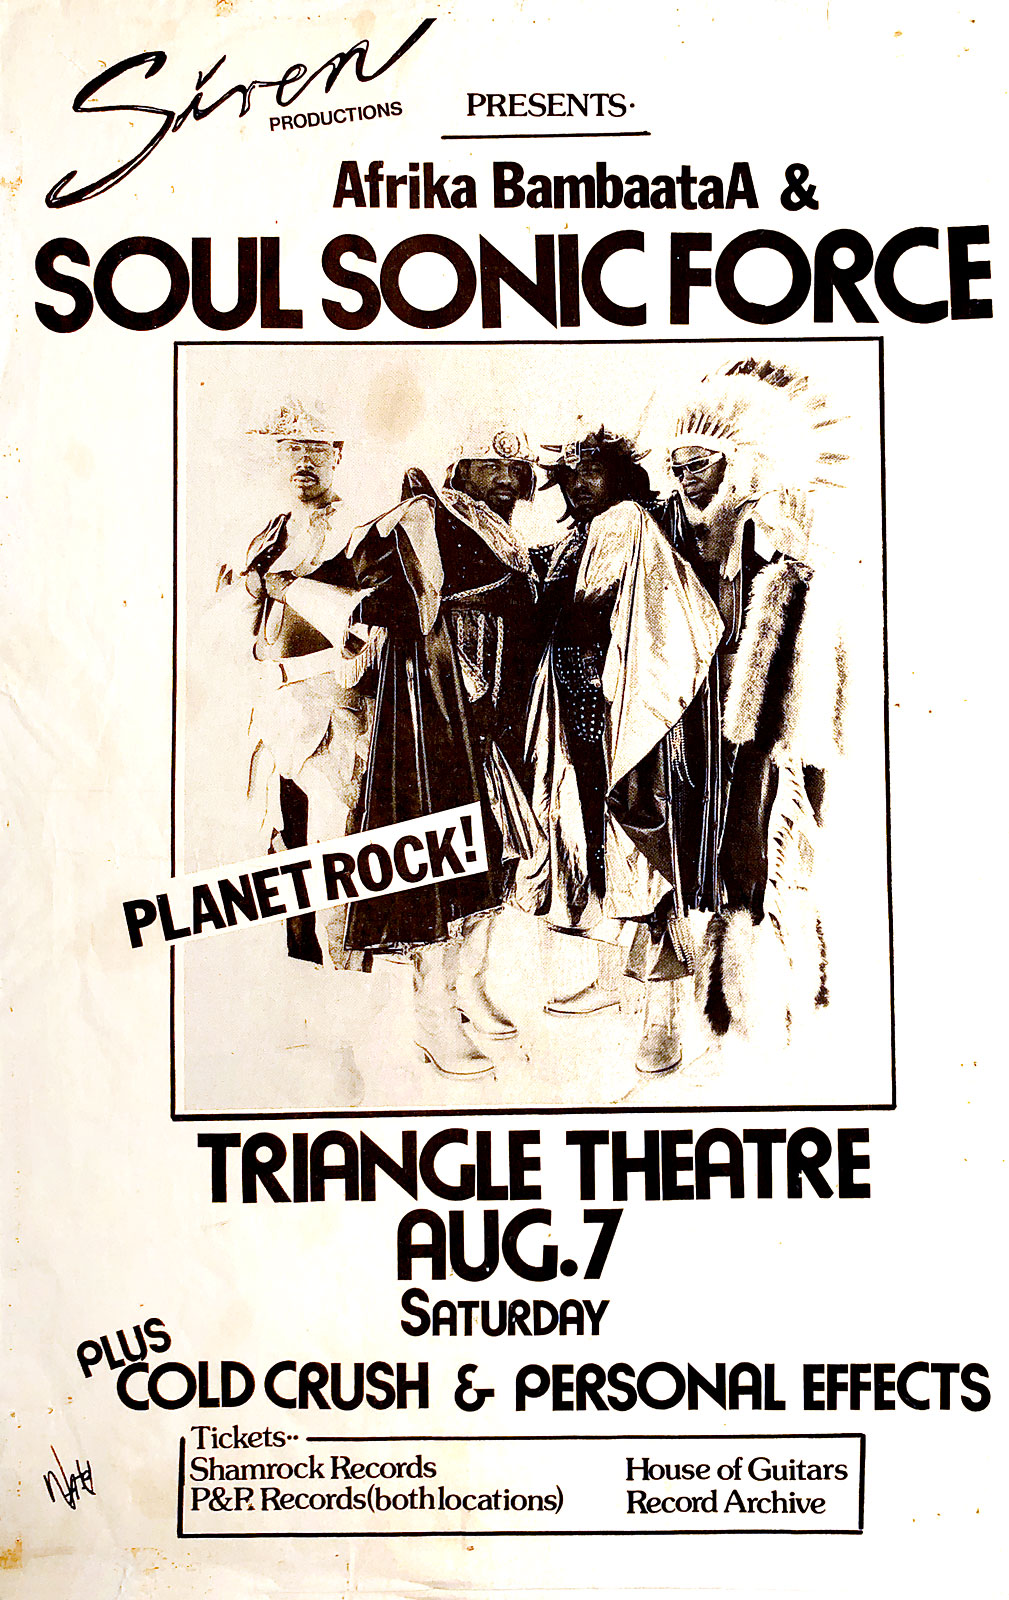 Poster for Soul Sonic Force, Personal Effects and Clod Crush at the Triangle Theater in Rochester, New York on 08.07.1982